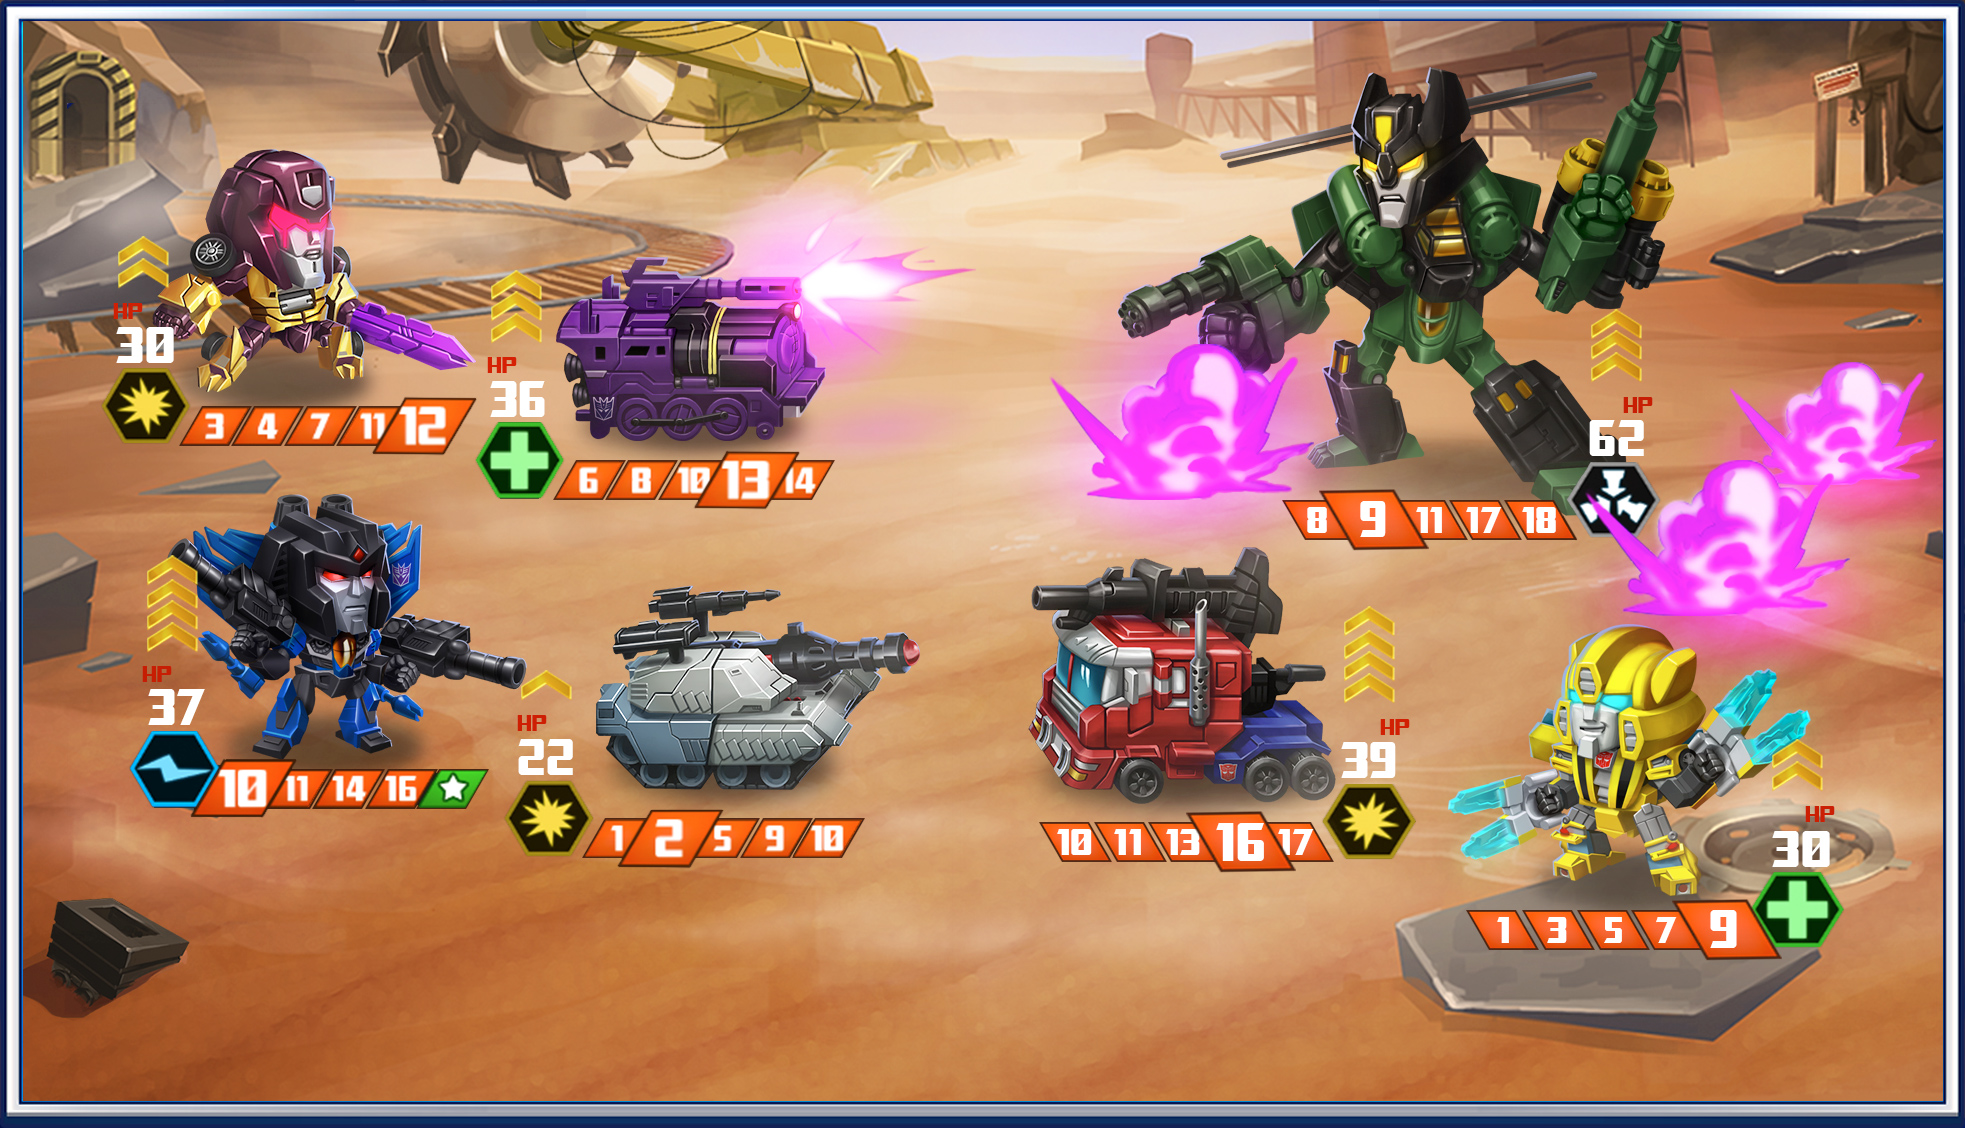 [Jeu Mobile] Transformers - Angry Birds, Forged to Fight, Earth Wars, Bumblebee Overdrive, etc - Page 6 Plain-battle-02